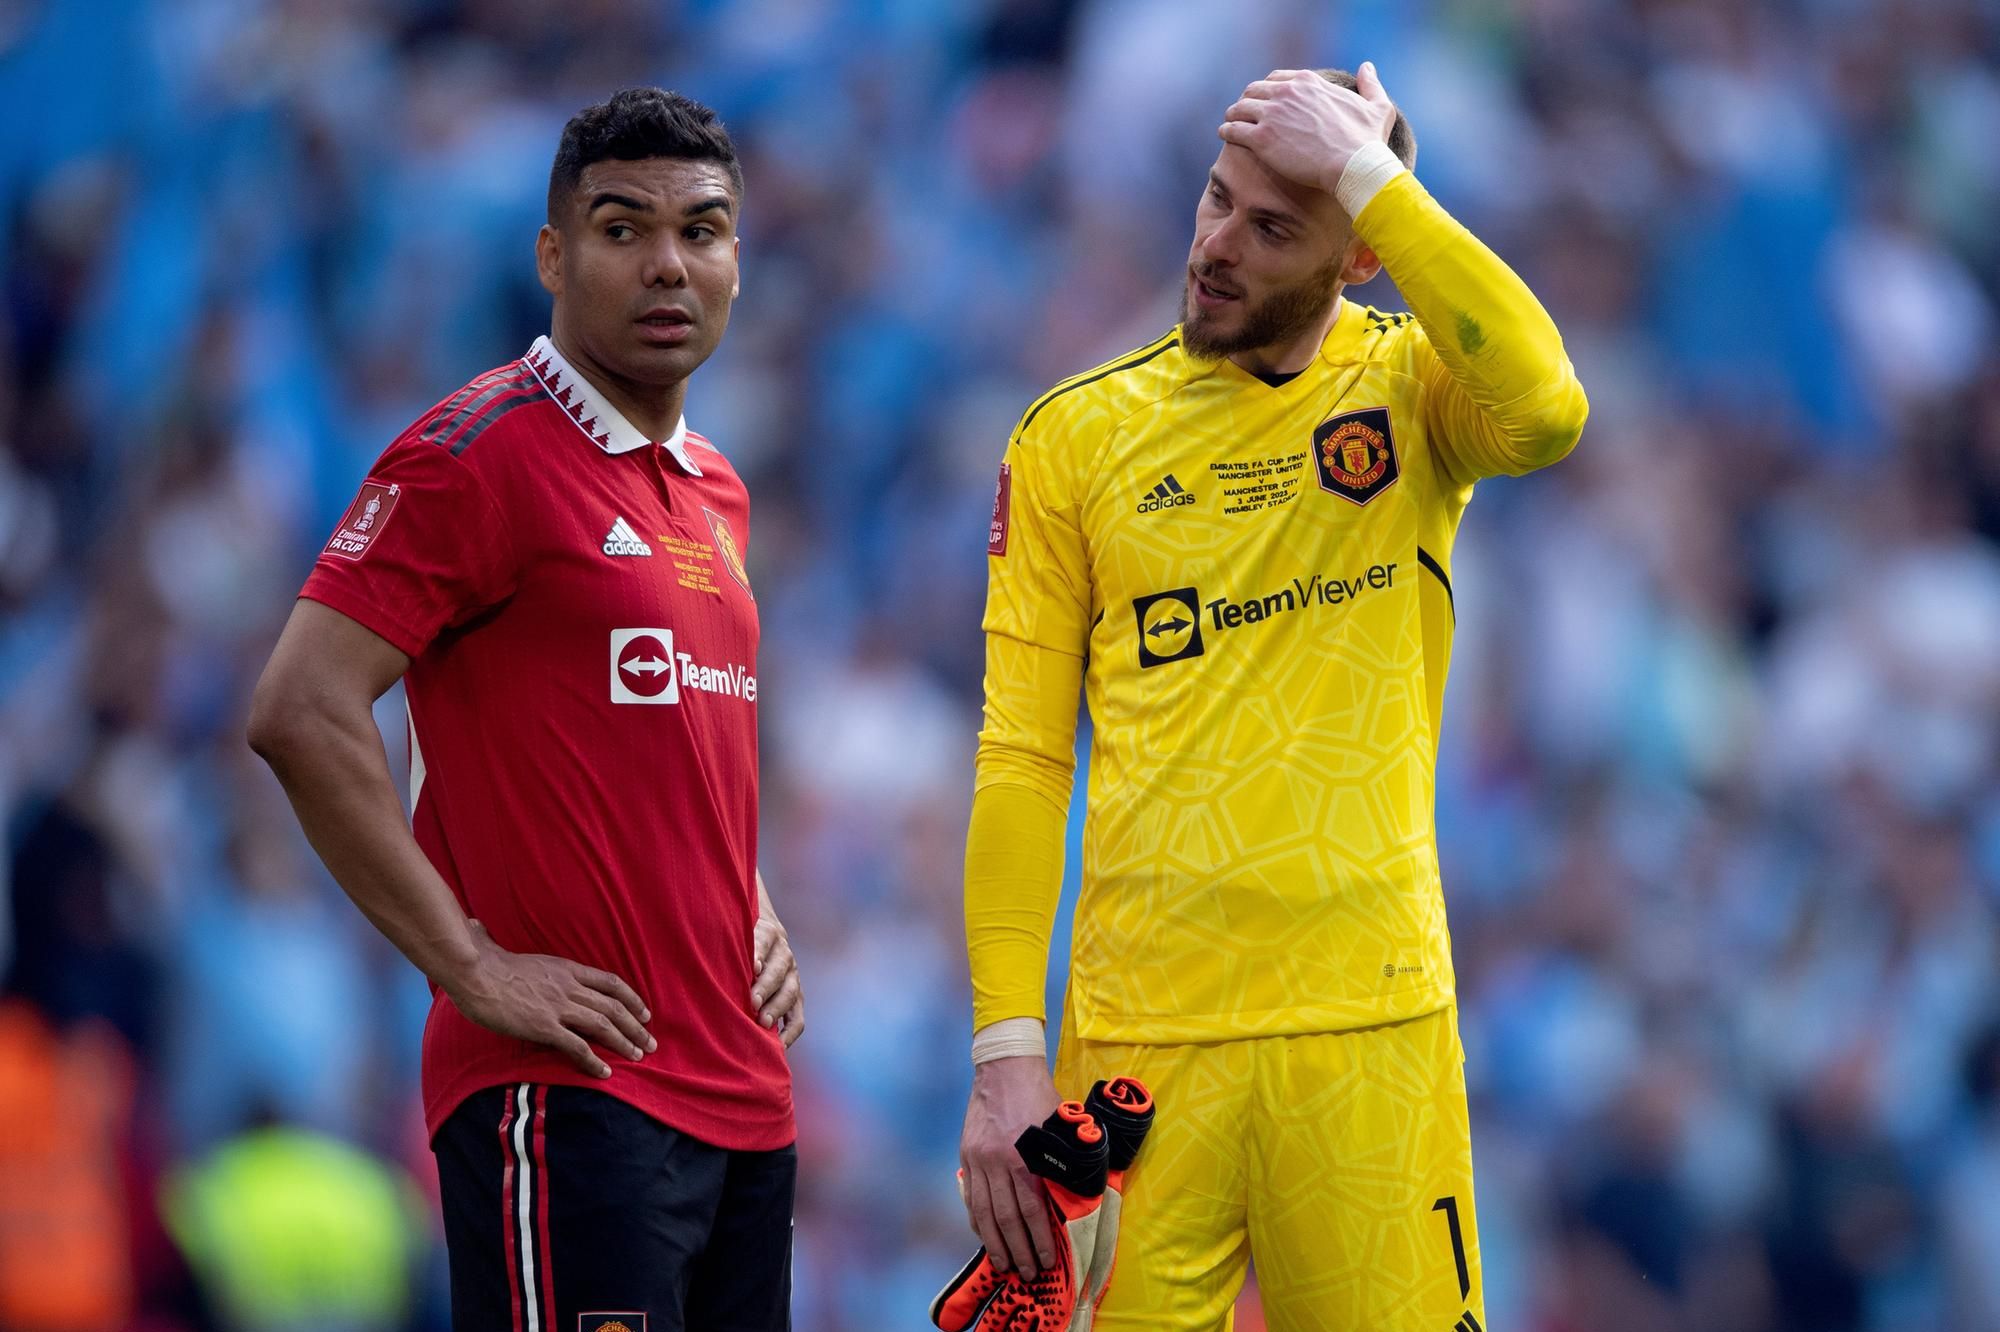 Manchester United boss Erik ten Hag told he can’t go after top targets until he ships out unwanted stars